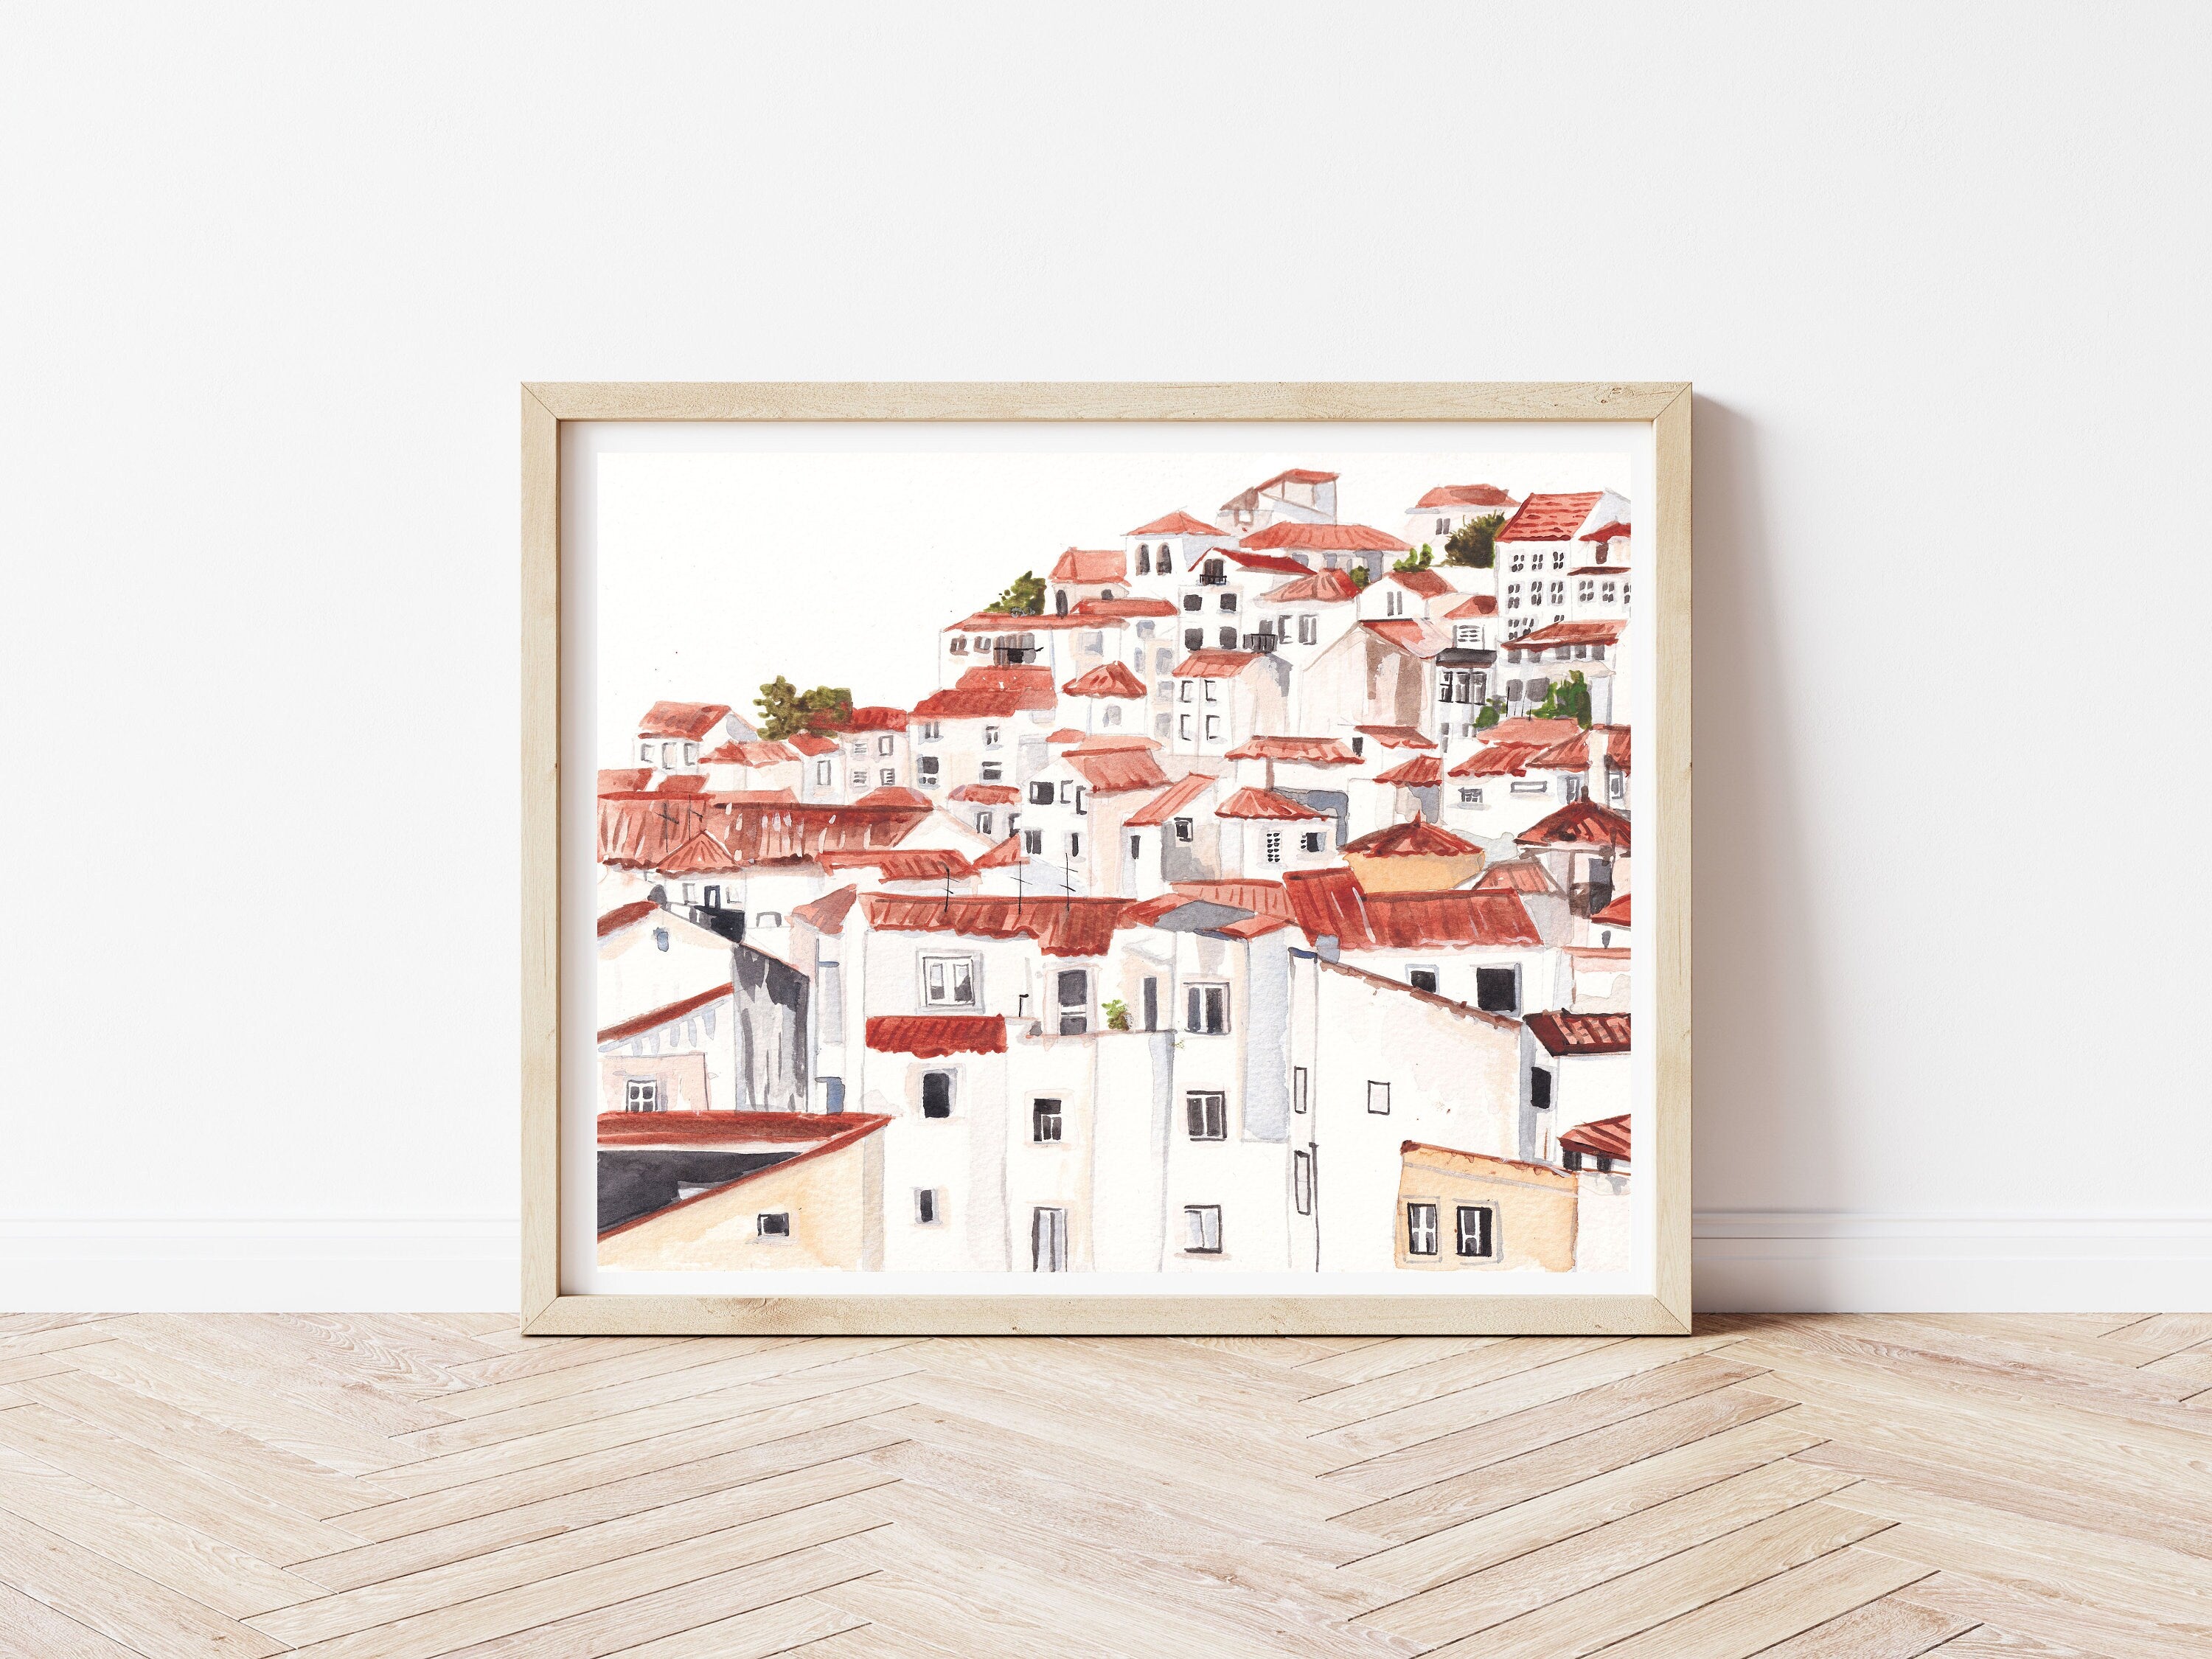 Amalfi coast village print of painting by Medjool Studio. Print of original gouache painting evoking the charm of an Italian coastal village. This neutral toned art print captures the traditional buildings and cliffs of the Amalfi coast.